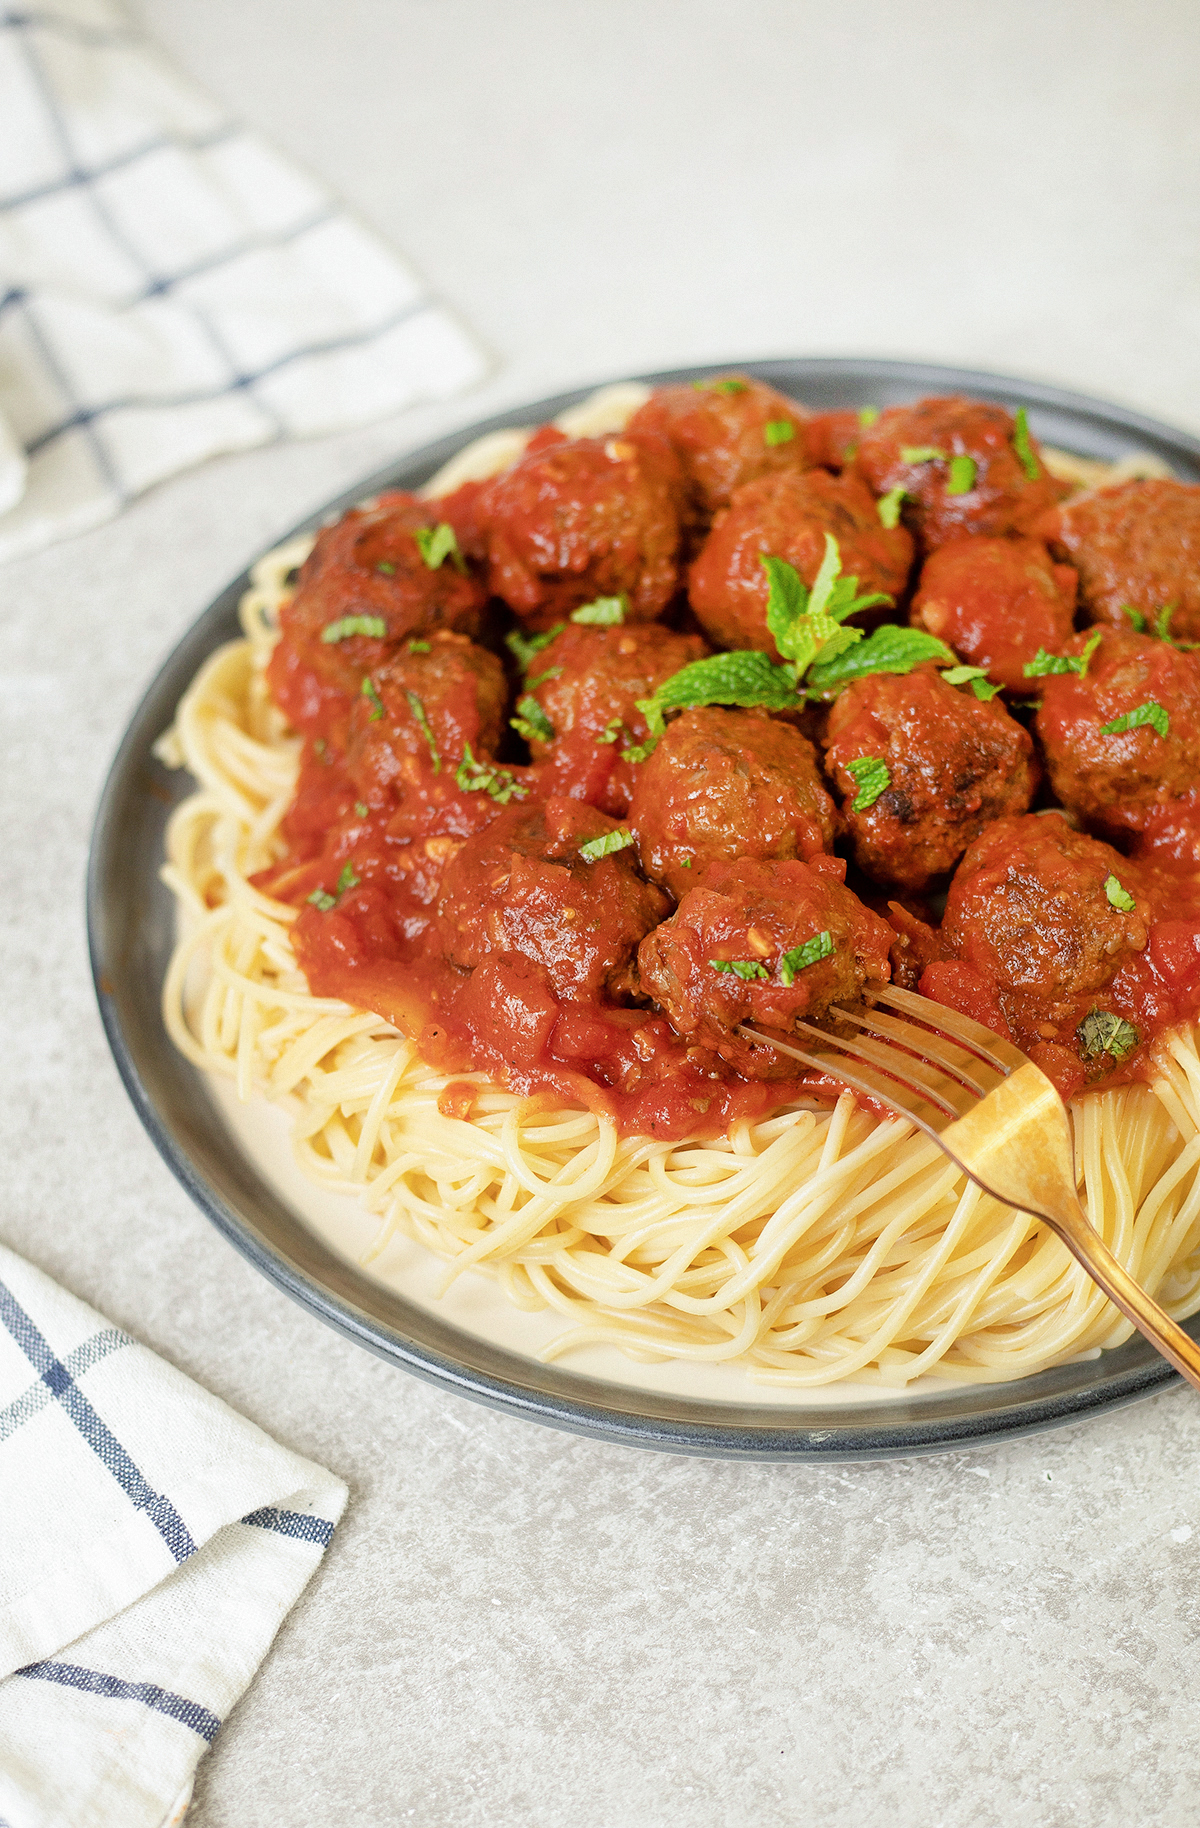 Moroccan Meatballs and pasta